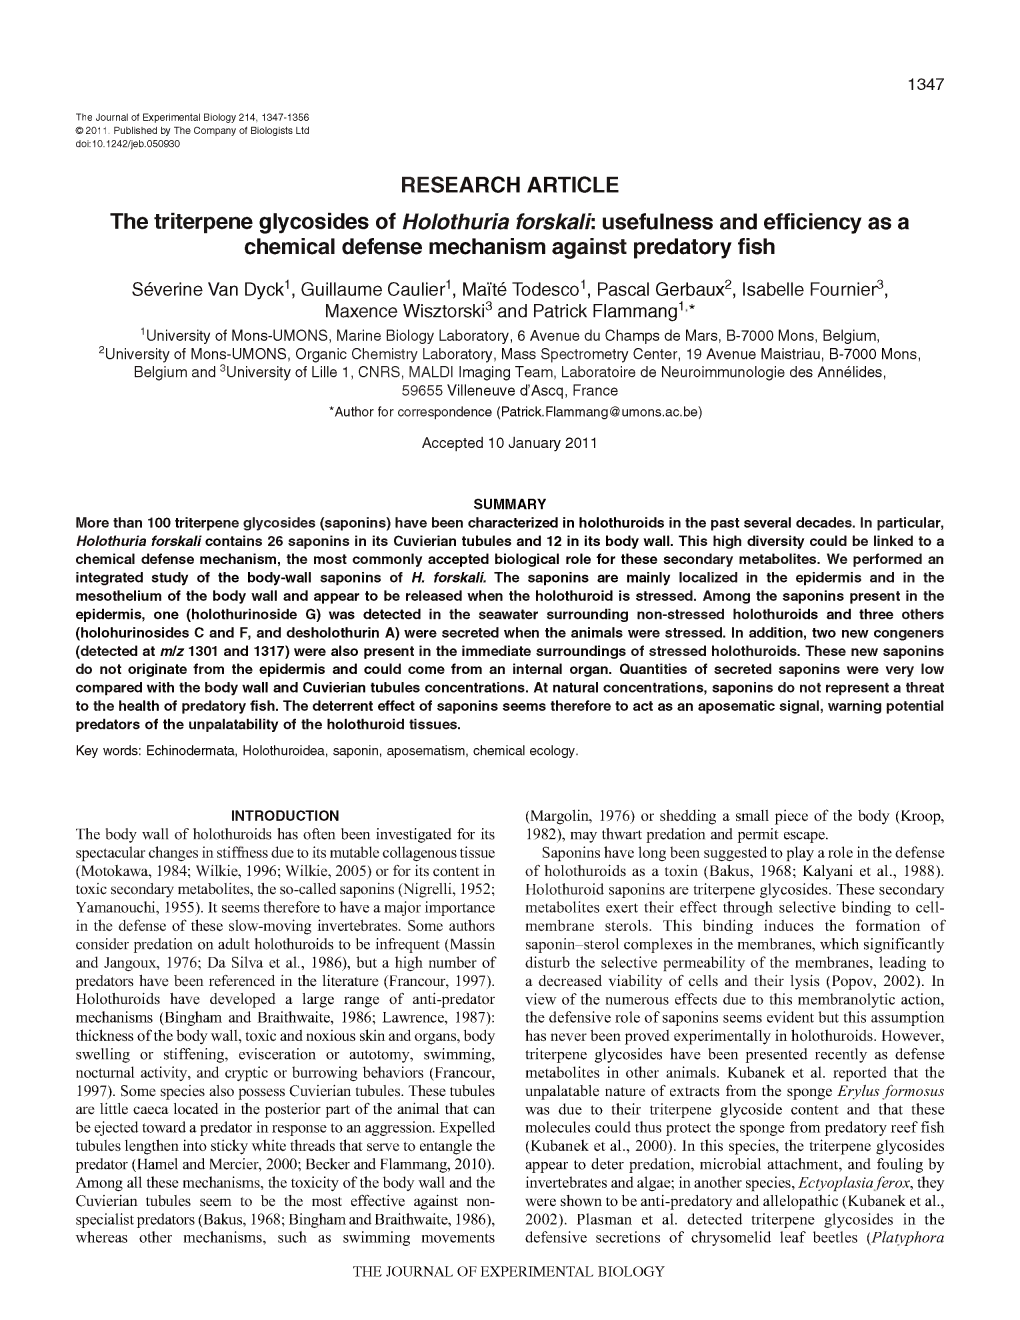 RESEARCH ARTICLE the Triterpene Glycosides of Holothuria Forskali